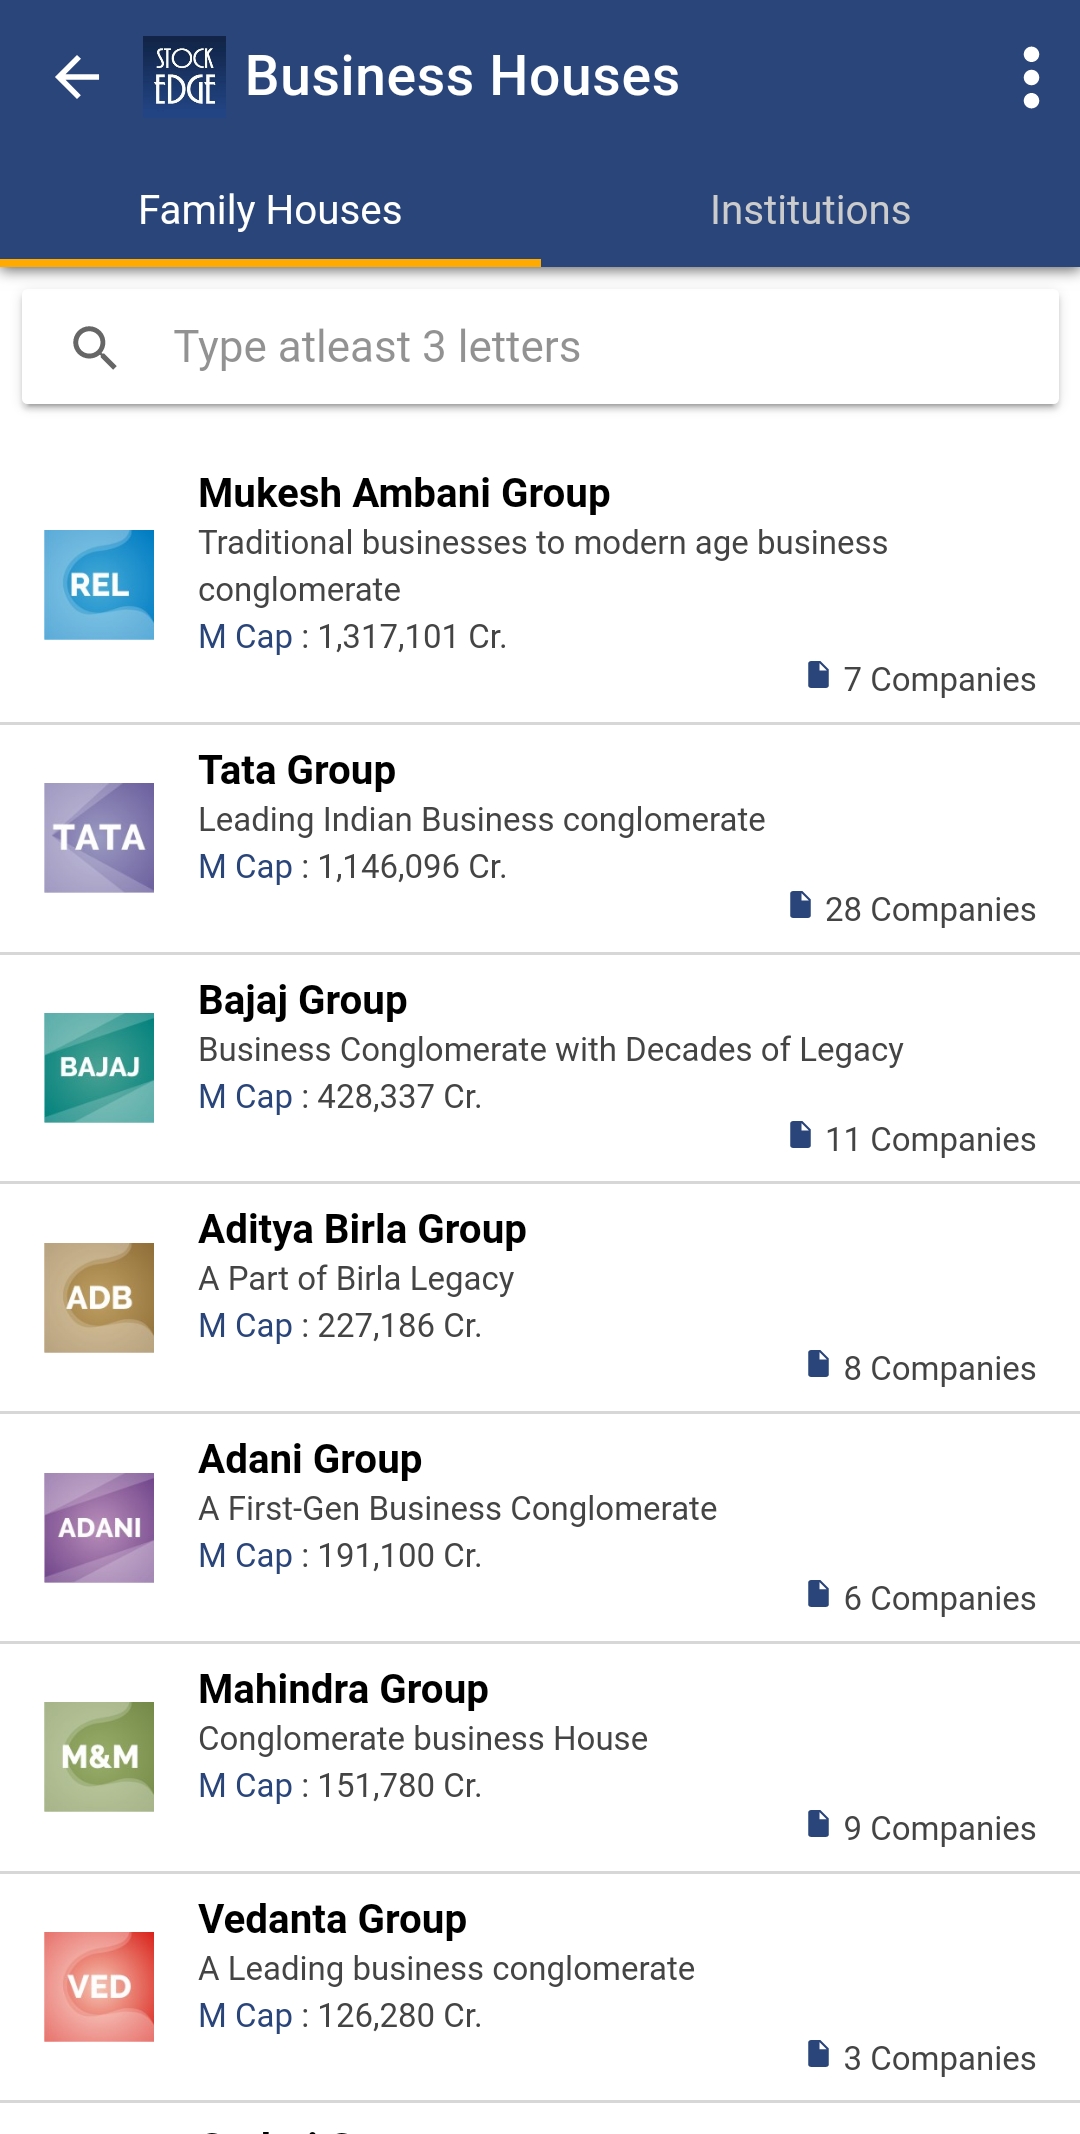 This is a screenshot of a list of indian business conglomerates and their details. The list is presented in a mobile app(stockedge) interface and is sorted alphabetically. Each entry in the list has the conglomerate’s name, a brief description, and the number of companies under it. The list includes conglomerates such as reliance industries, tata group, adani group, and vedanta group.